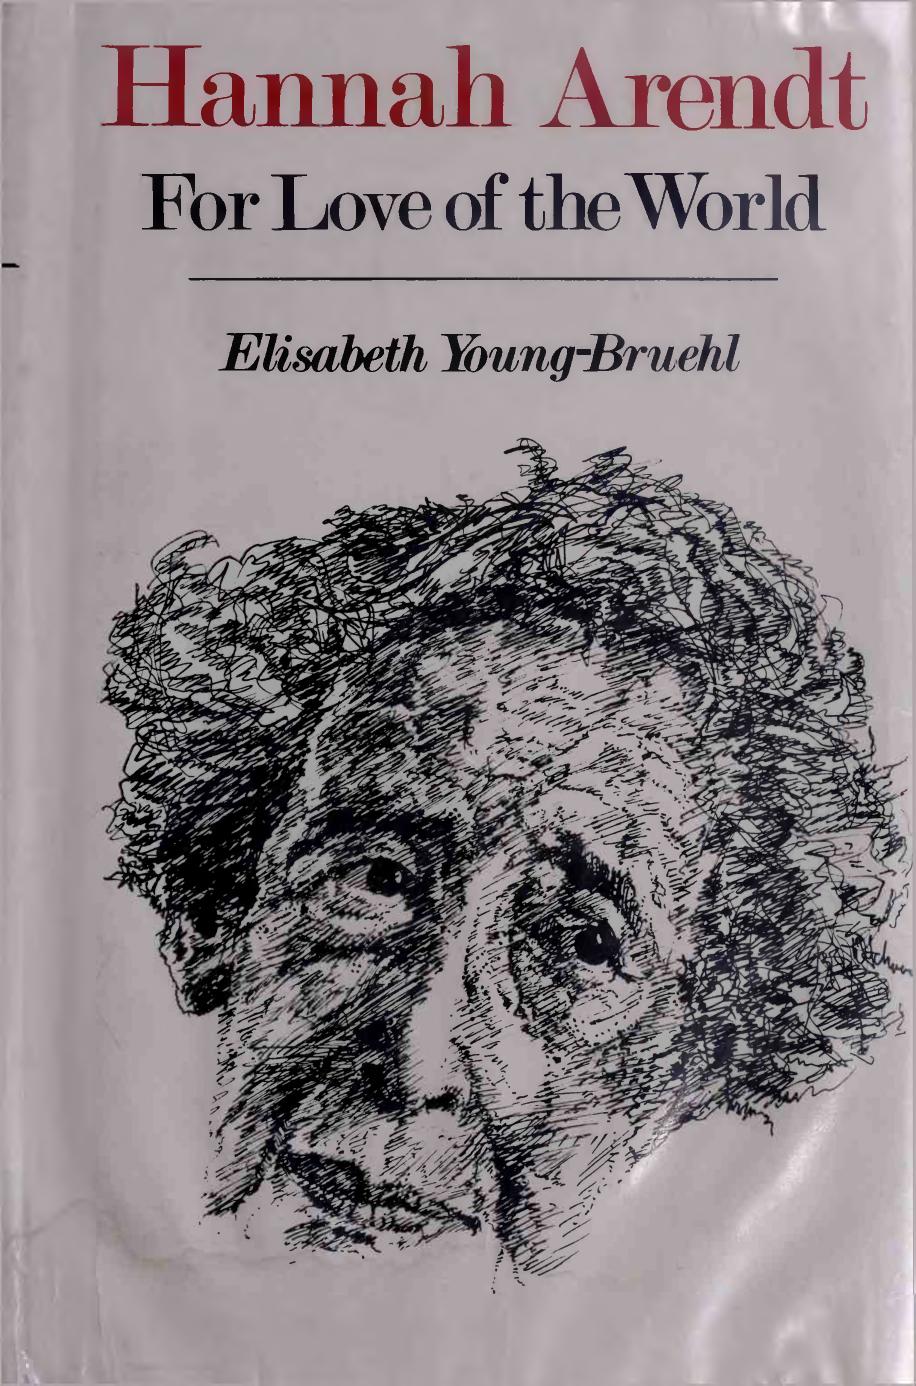 Hannah Arendt: For Love of the World